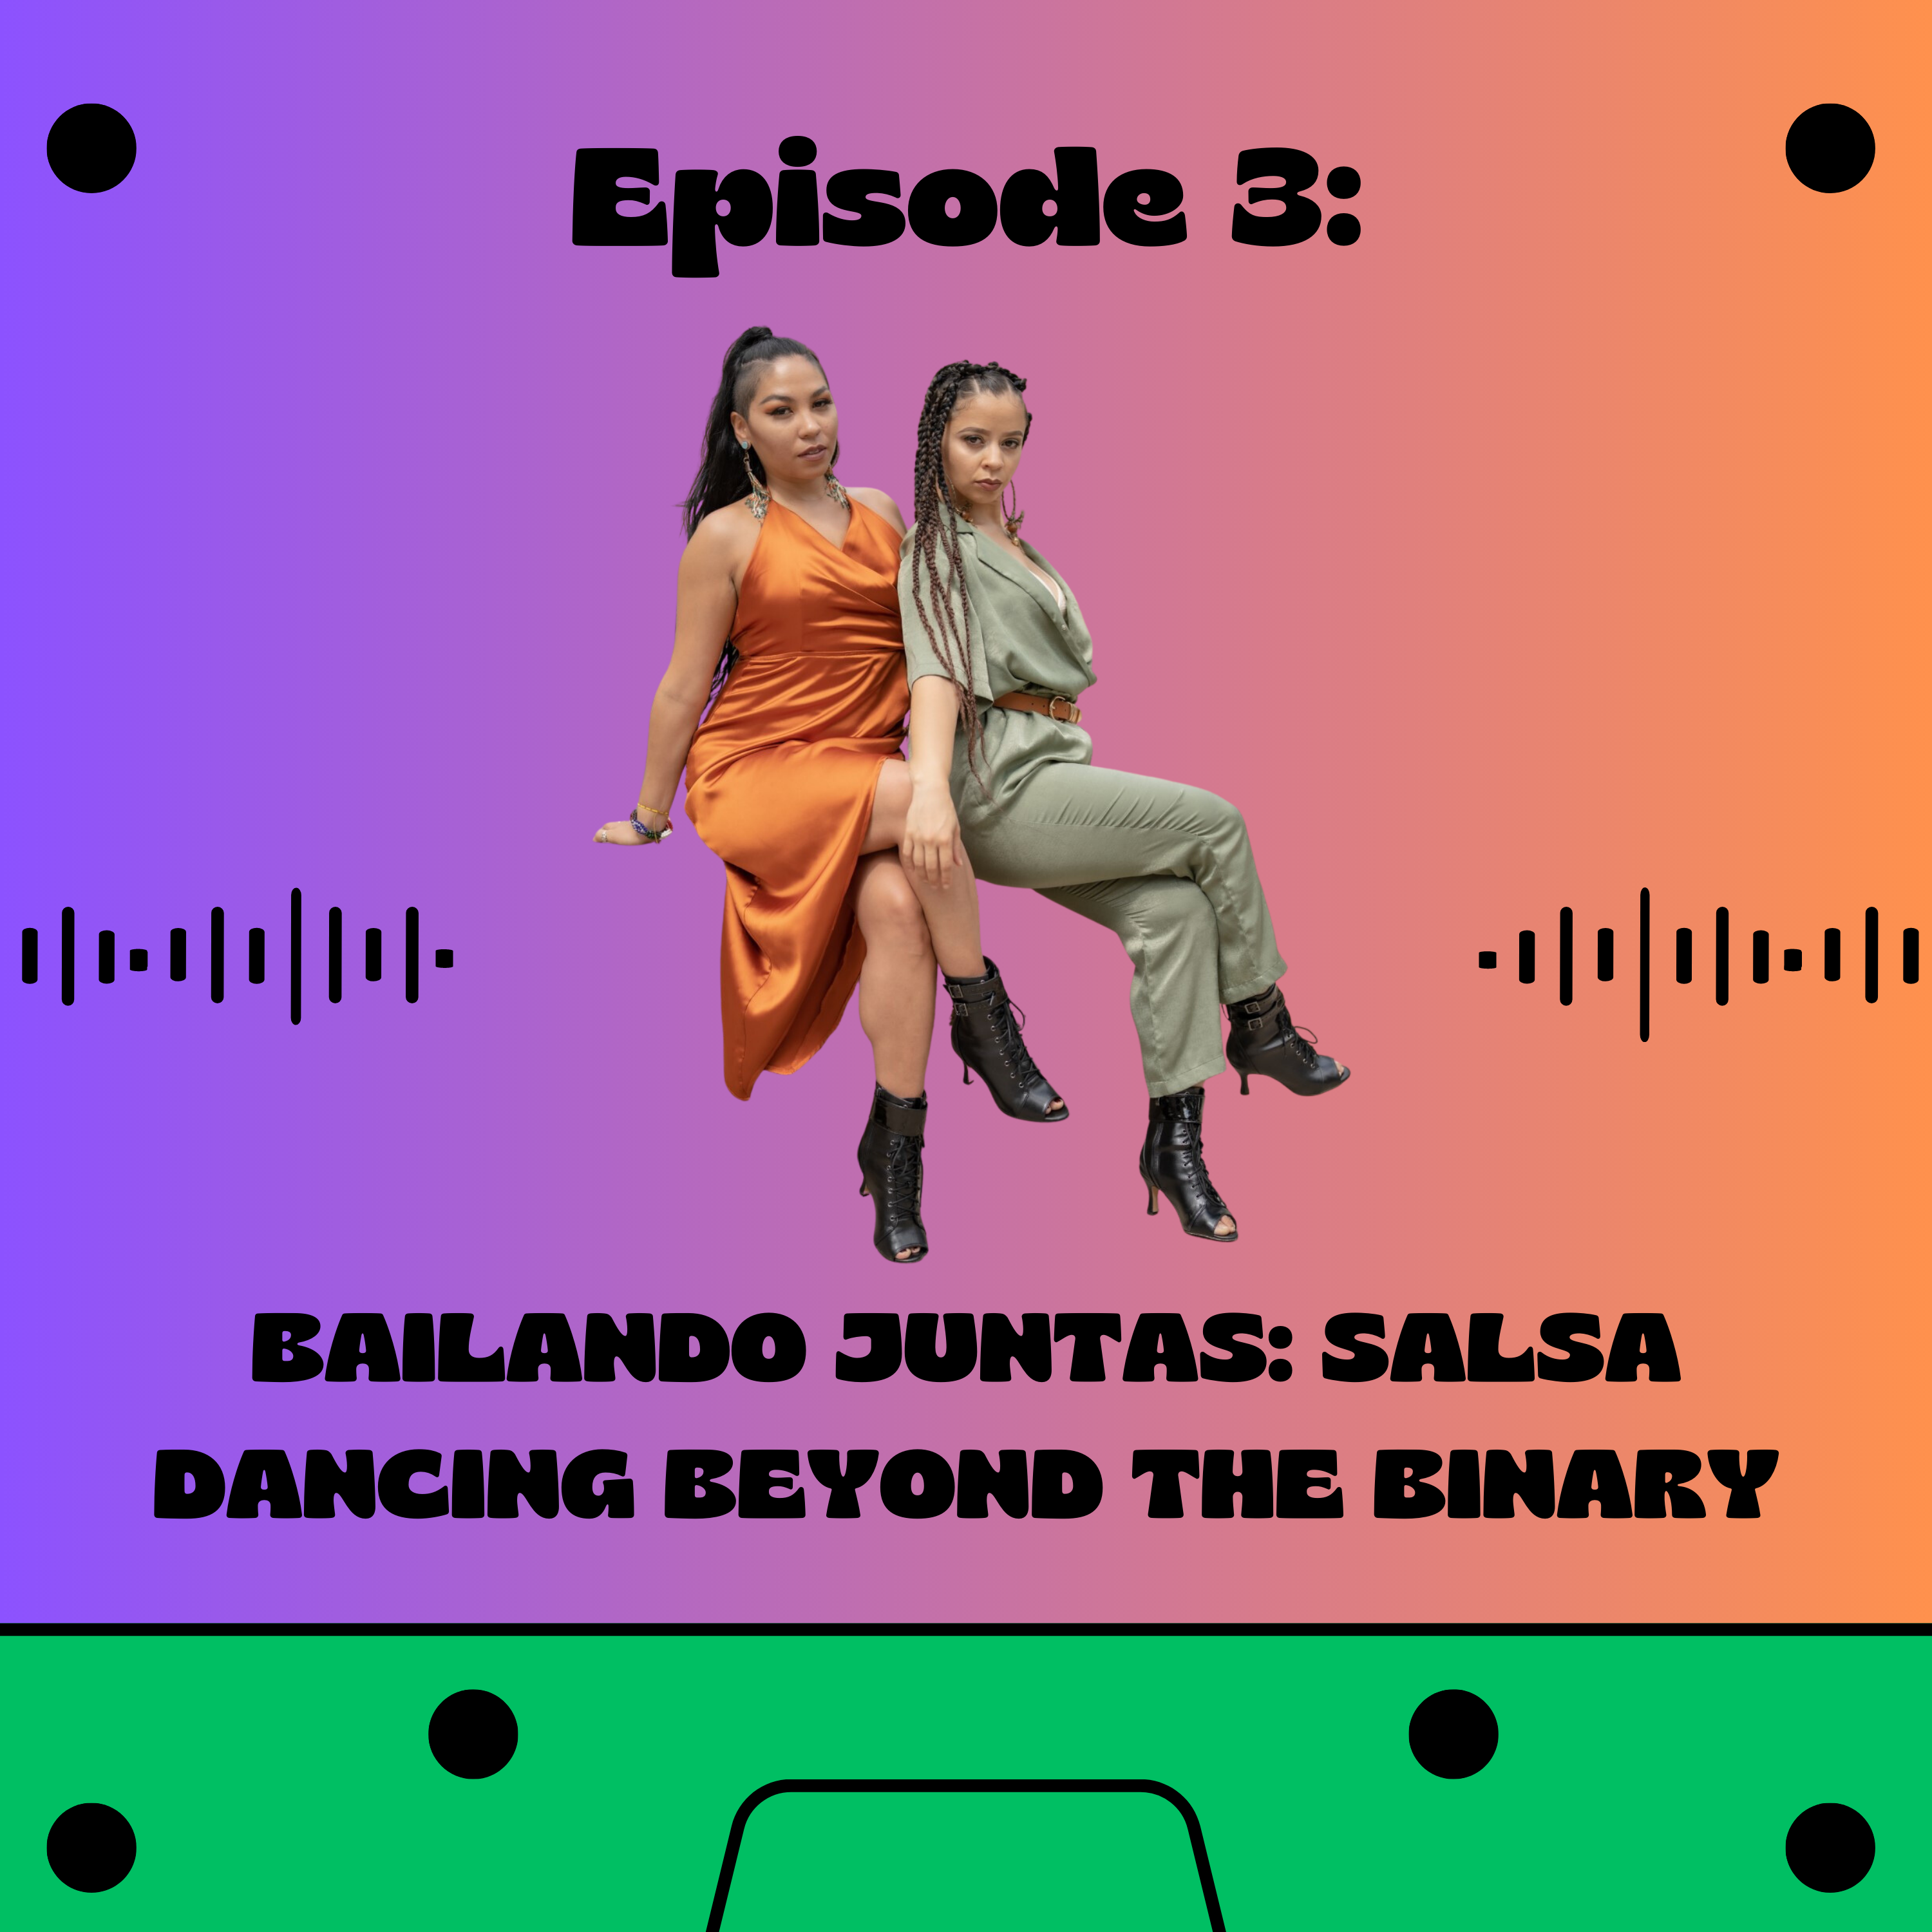 The cover for Episode 3 of the Oíste? Podcast series. The text on the photo reads Oíste? Podcast Bailando Juntas: Salsa Dancing Beyond the Binary. There is a picture of two dancers in dresses sitting down with the right dancer’s hands on the left dancer’s